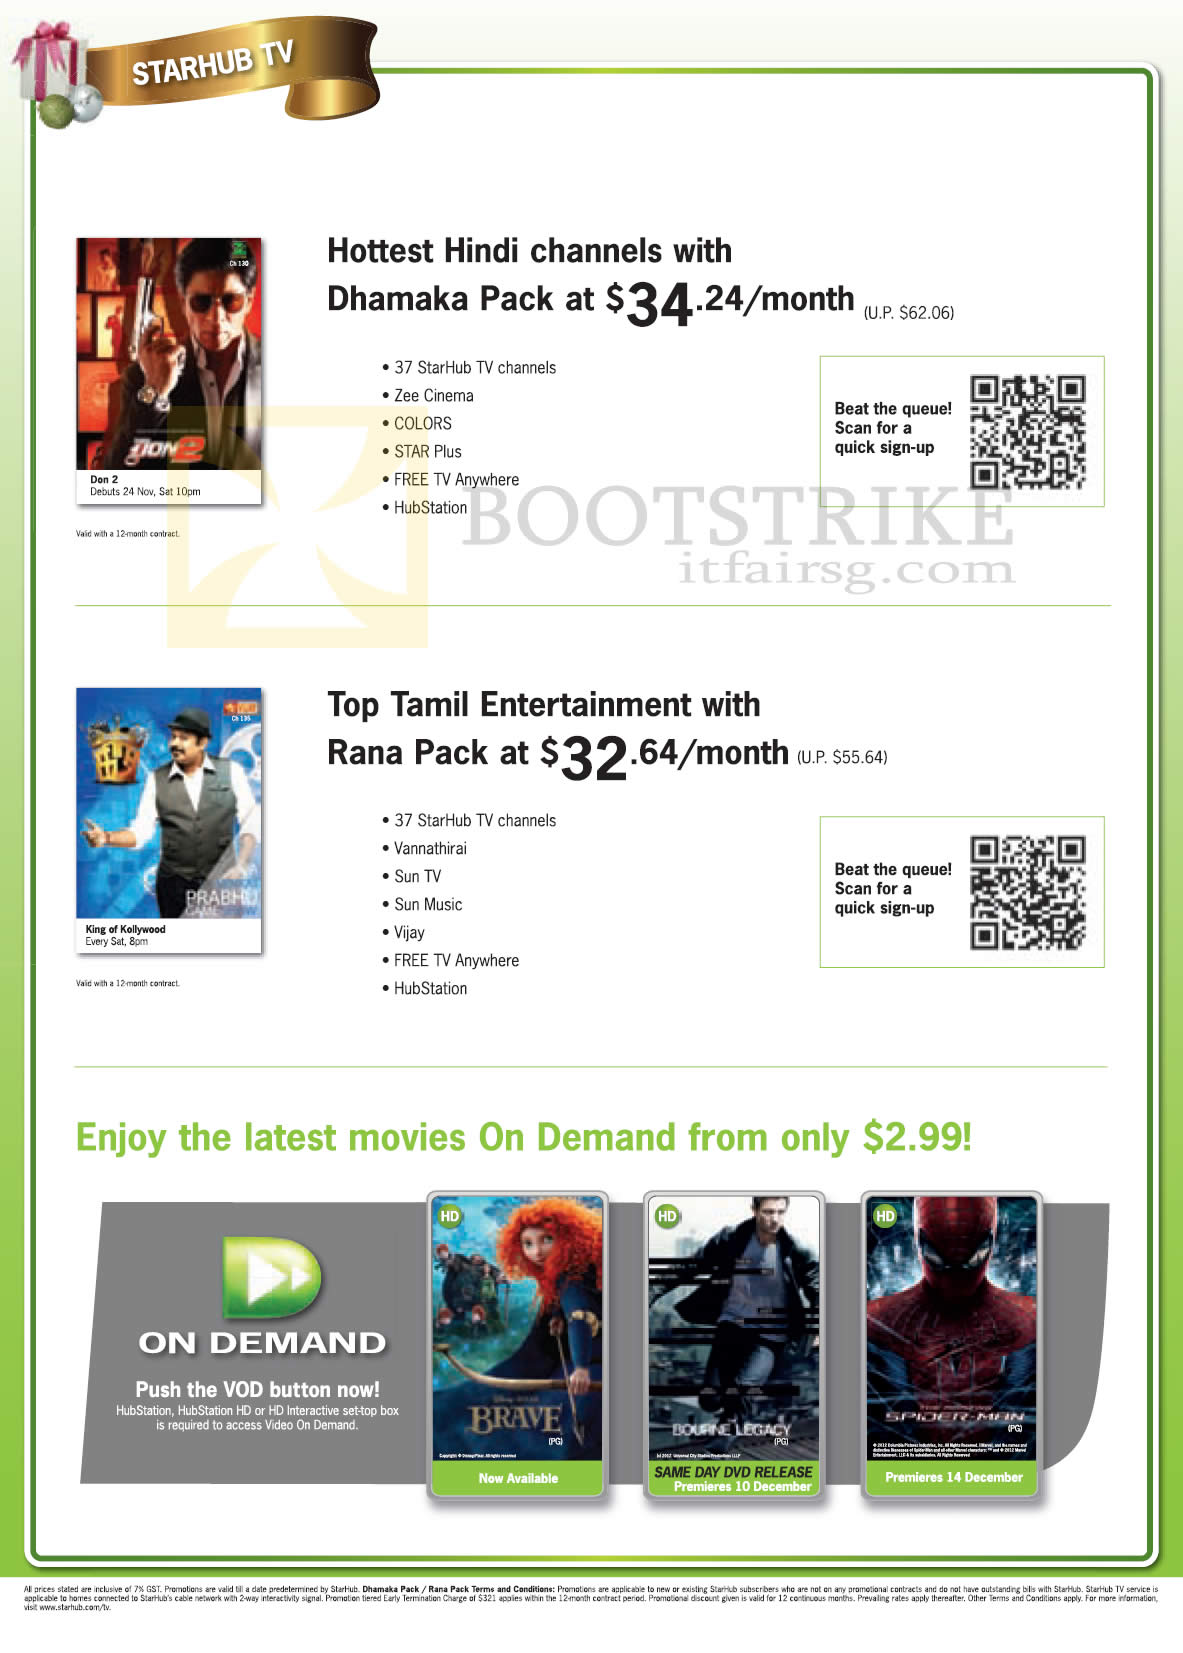 SITEX 2012 price list image brochure of Starhub Cable TV Dhamaka Pack, Rana Pack, Movies On Demand VOD